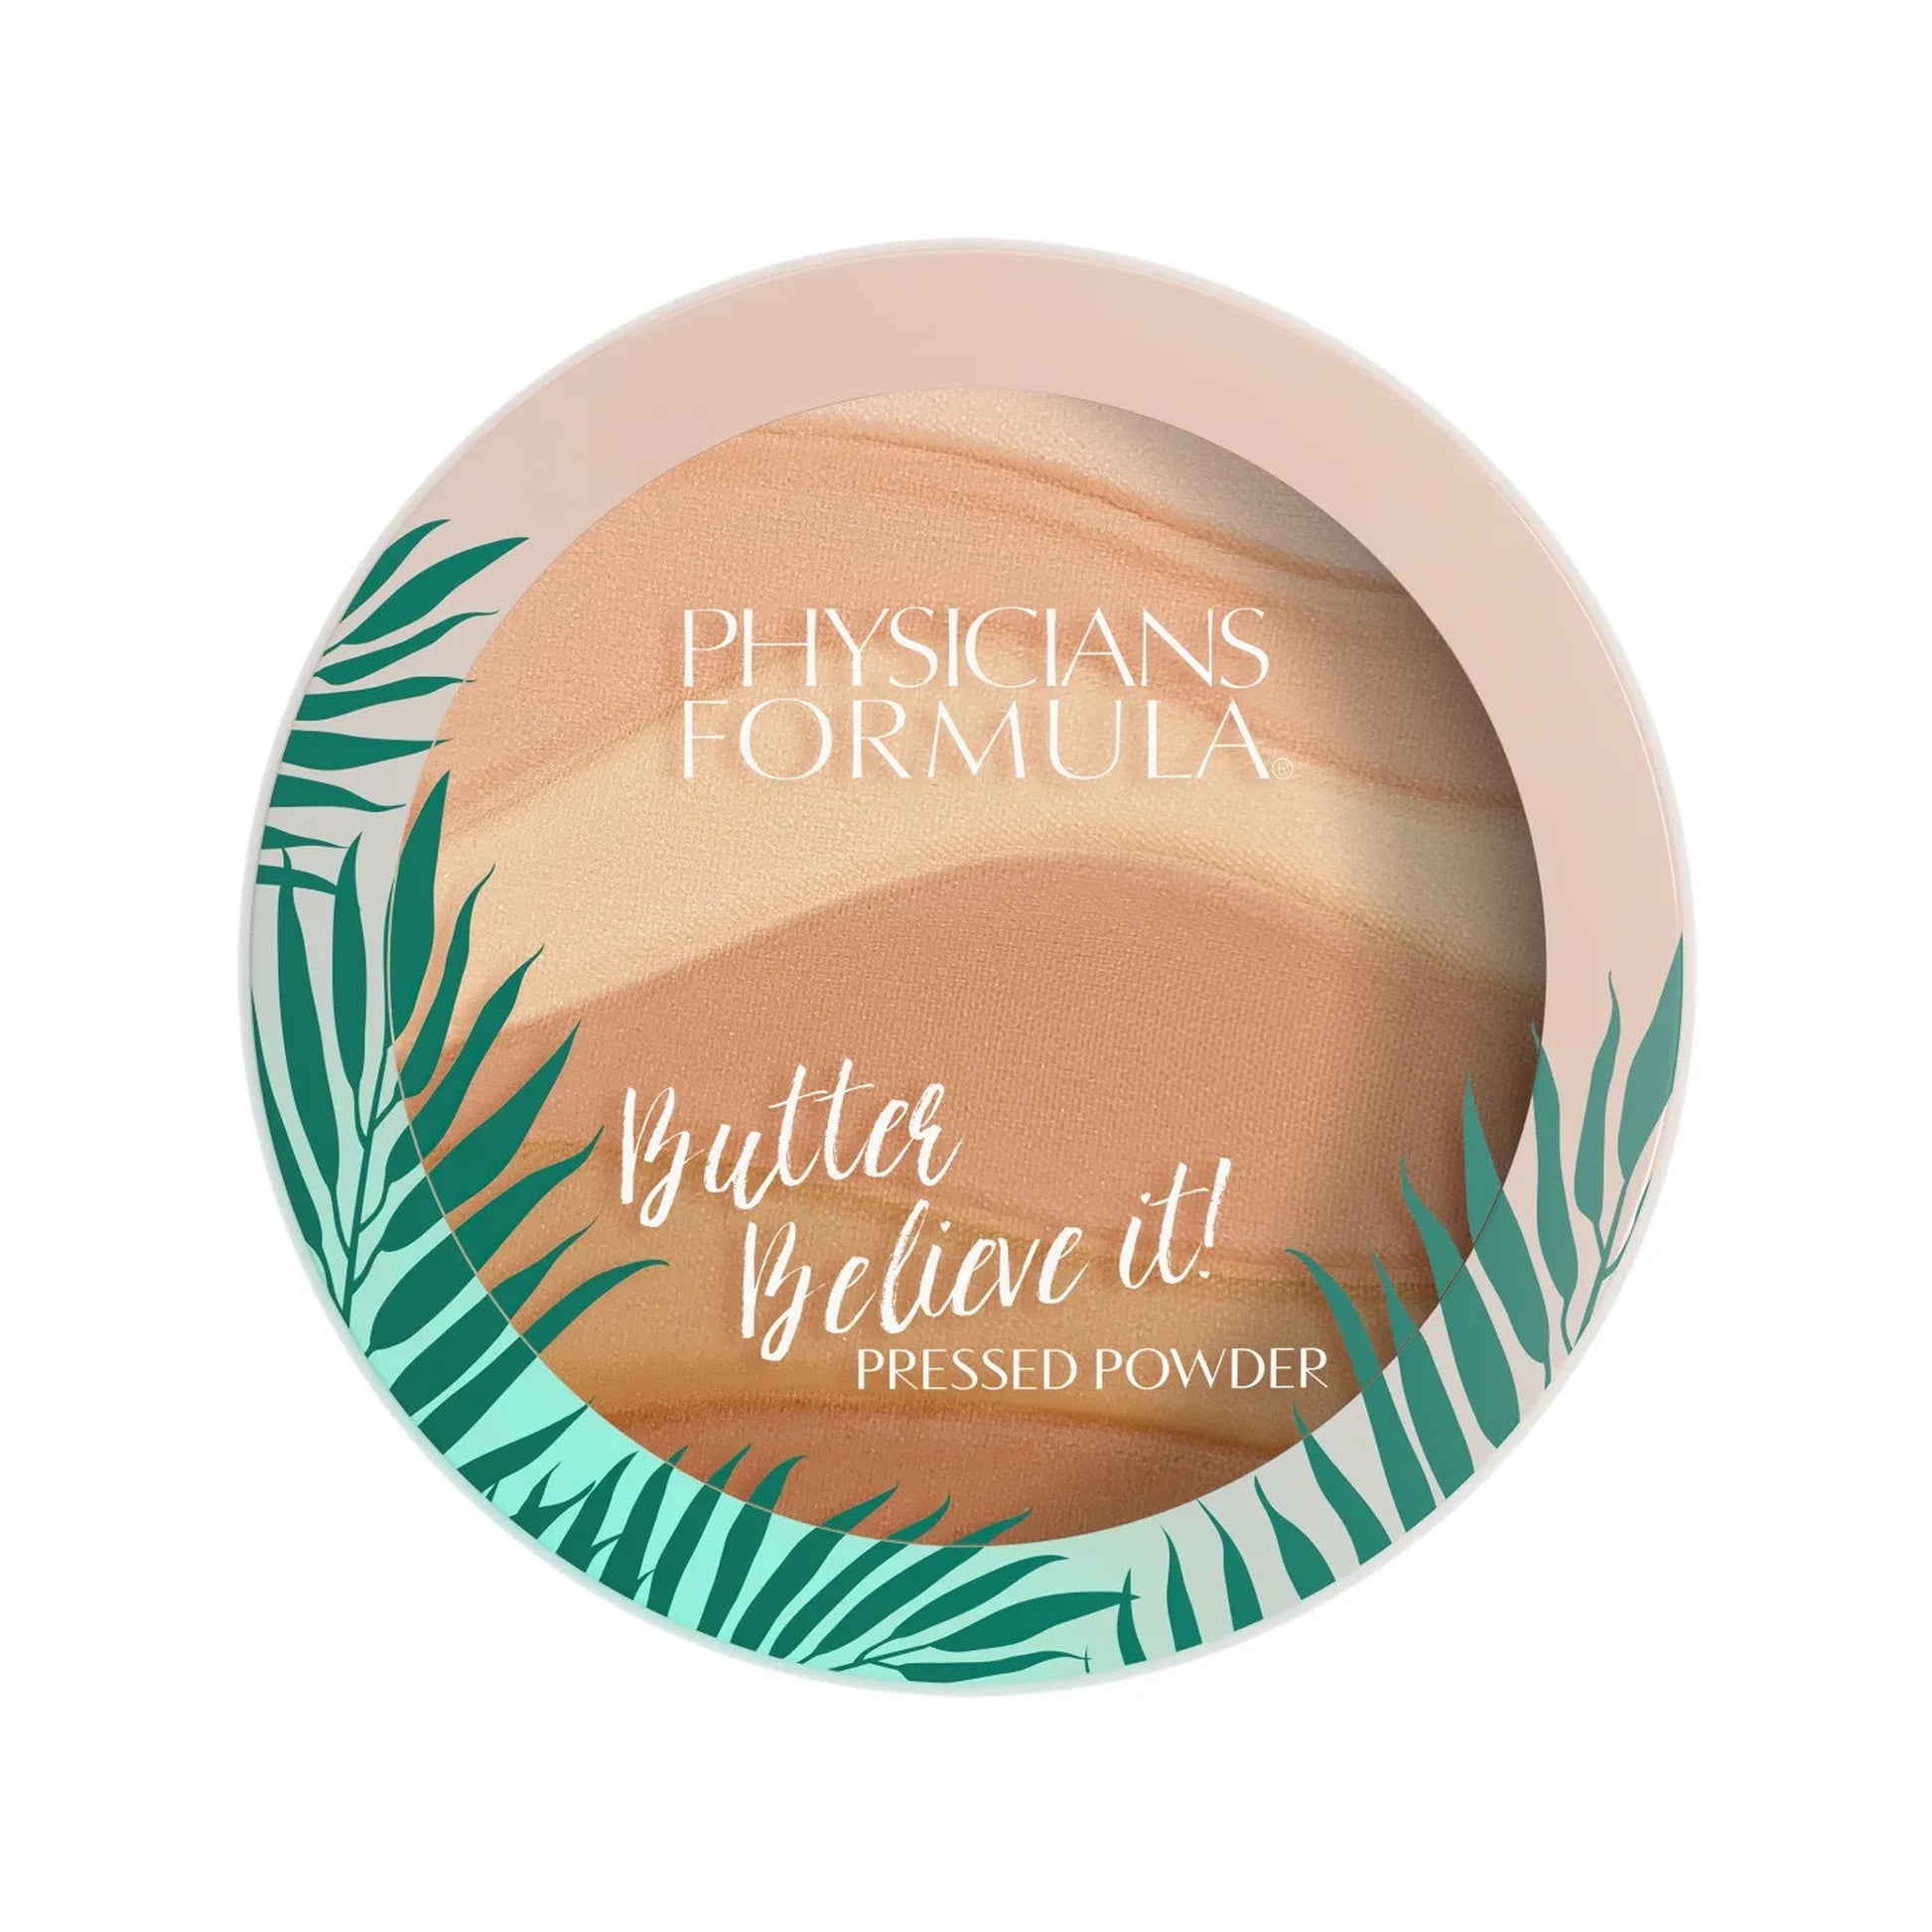 Physicians Formula Butter Believe it Pressed Powder Creamy Natural